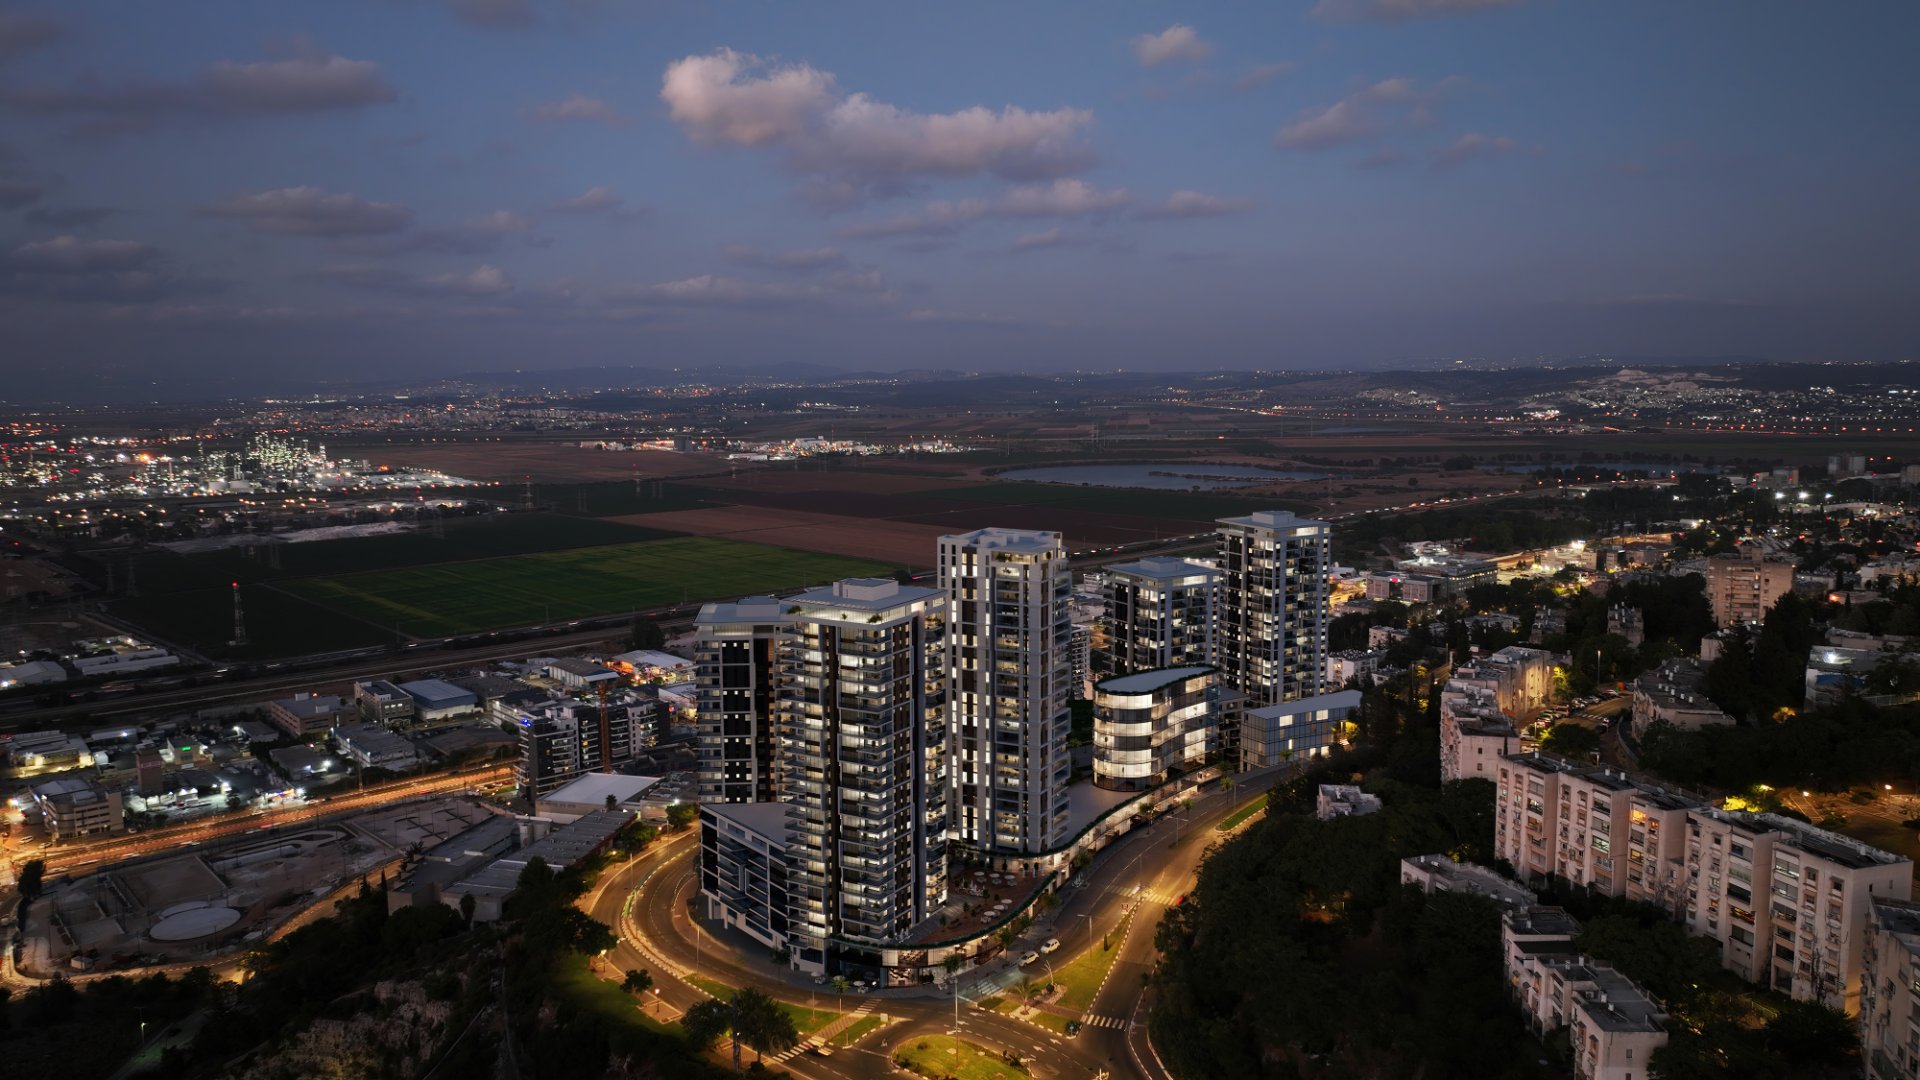 Photograph of few Bulidings in Nesher project at night